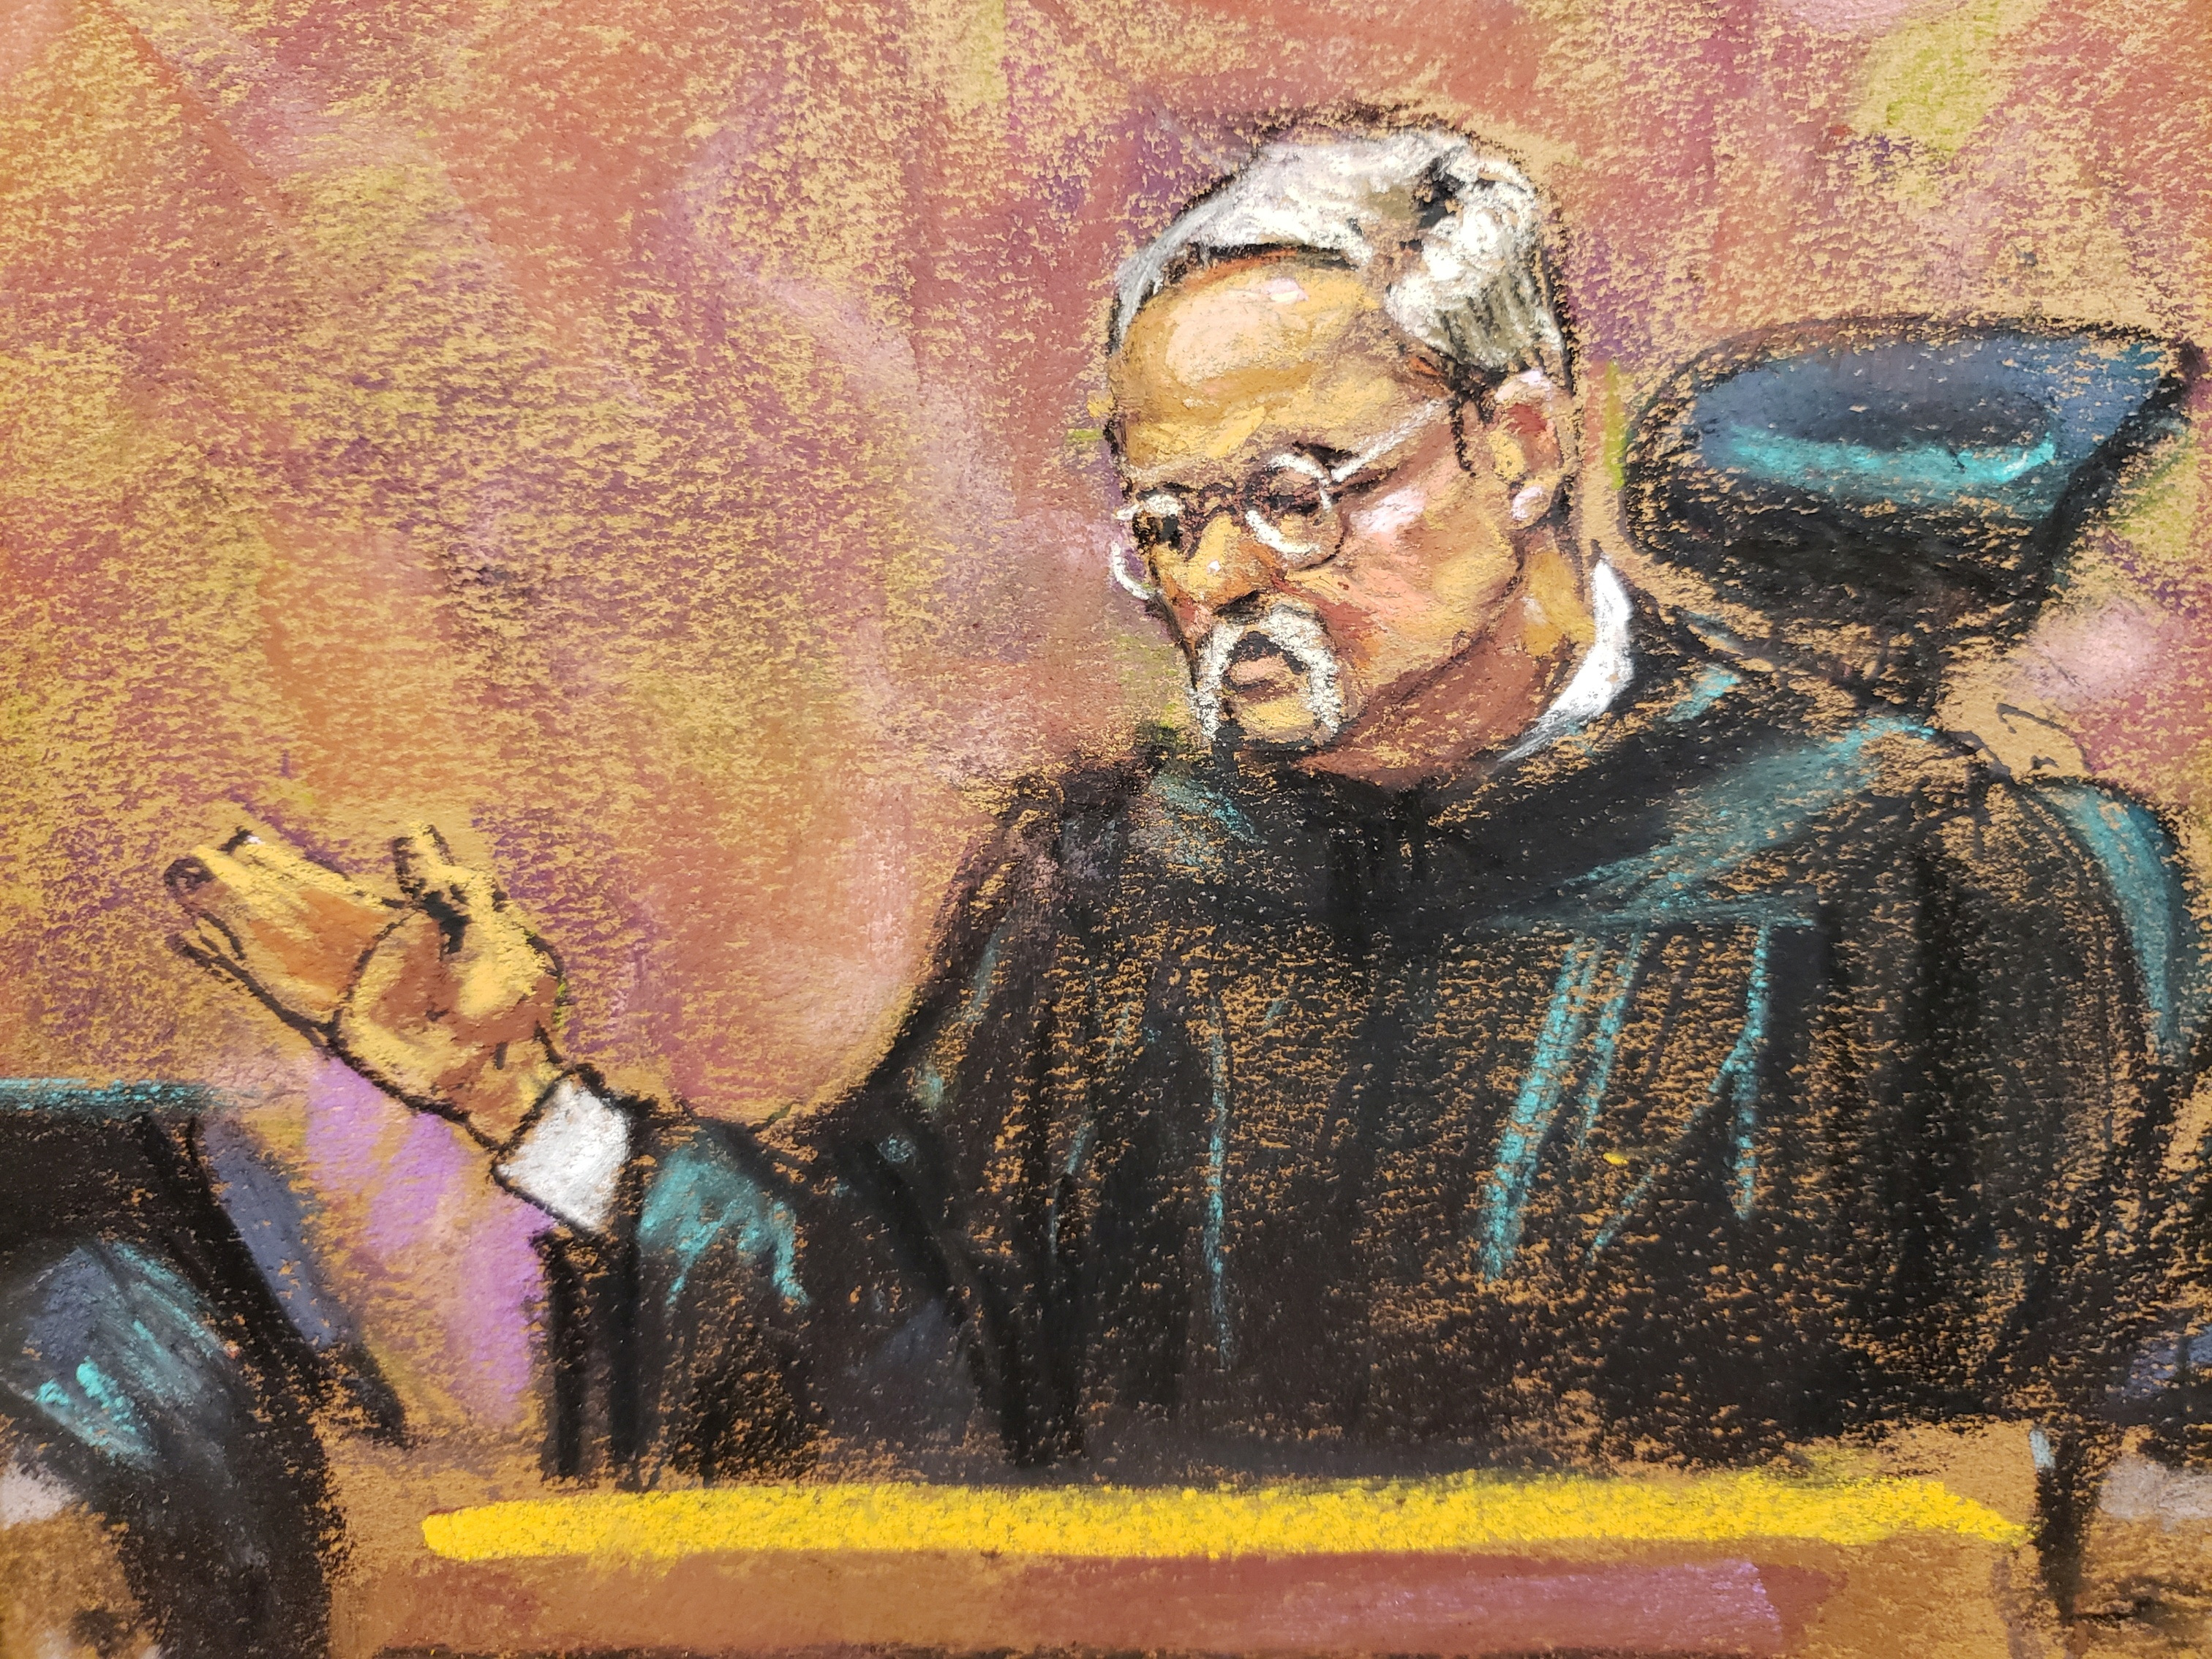 Judge Brian Cogan instructs the jury on the law ahead of deliberations in the trial of Mexico's former Public Security Minister Genaro Garcia Luna on charges that he accepted millions of dollars to protect the powerful Sinaloa Cartel, once run by imprisoned drug lord Joaquin "El Chapo" Guzman, at a courthouse in New York City, U.S., February 16, 2023 in this courtroom sketch. REUTERS/Jane Rosenberg